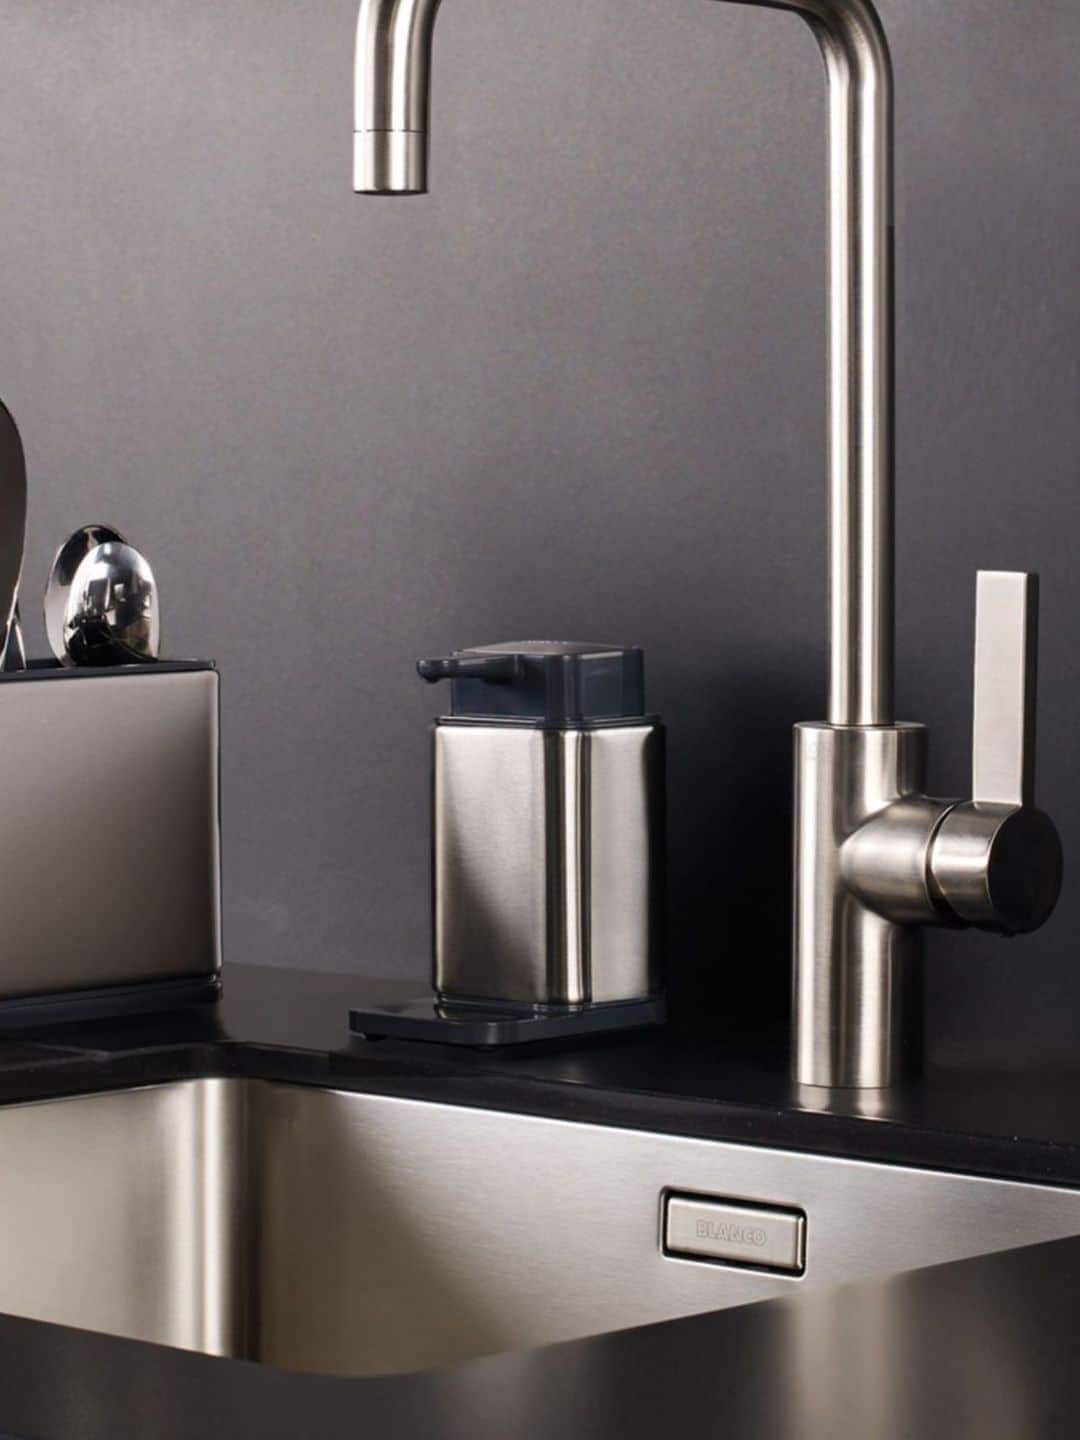 Joseph Joseph Grey & Silver-Toned Solid Stainless-Steel Soap Dispenser Price in India